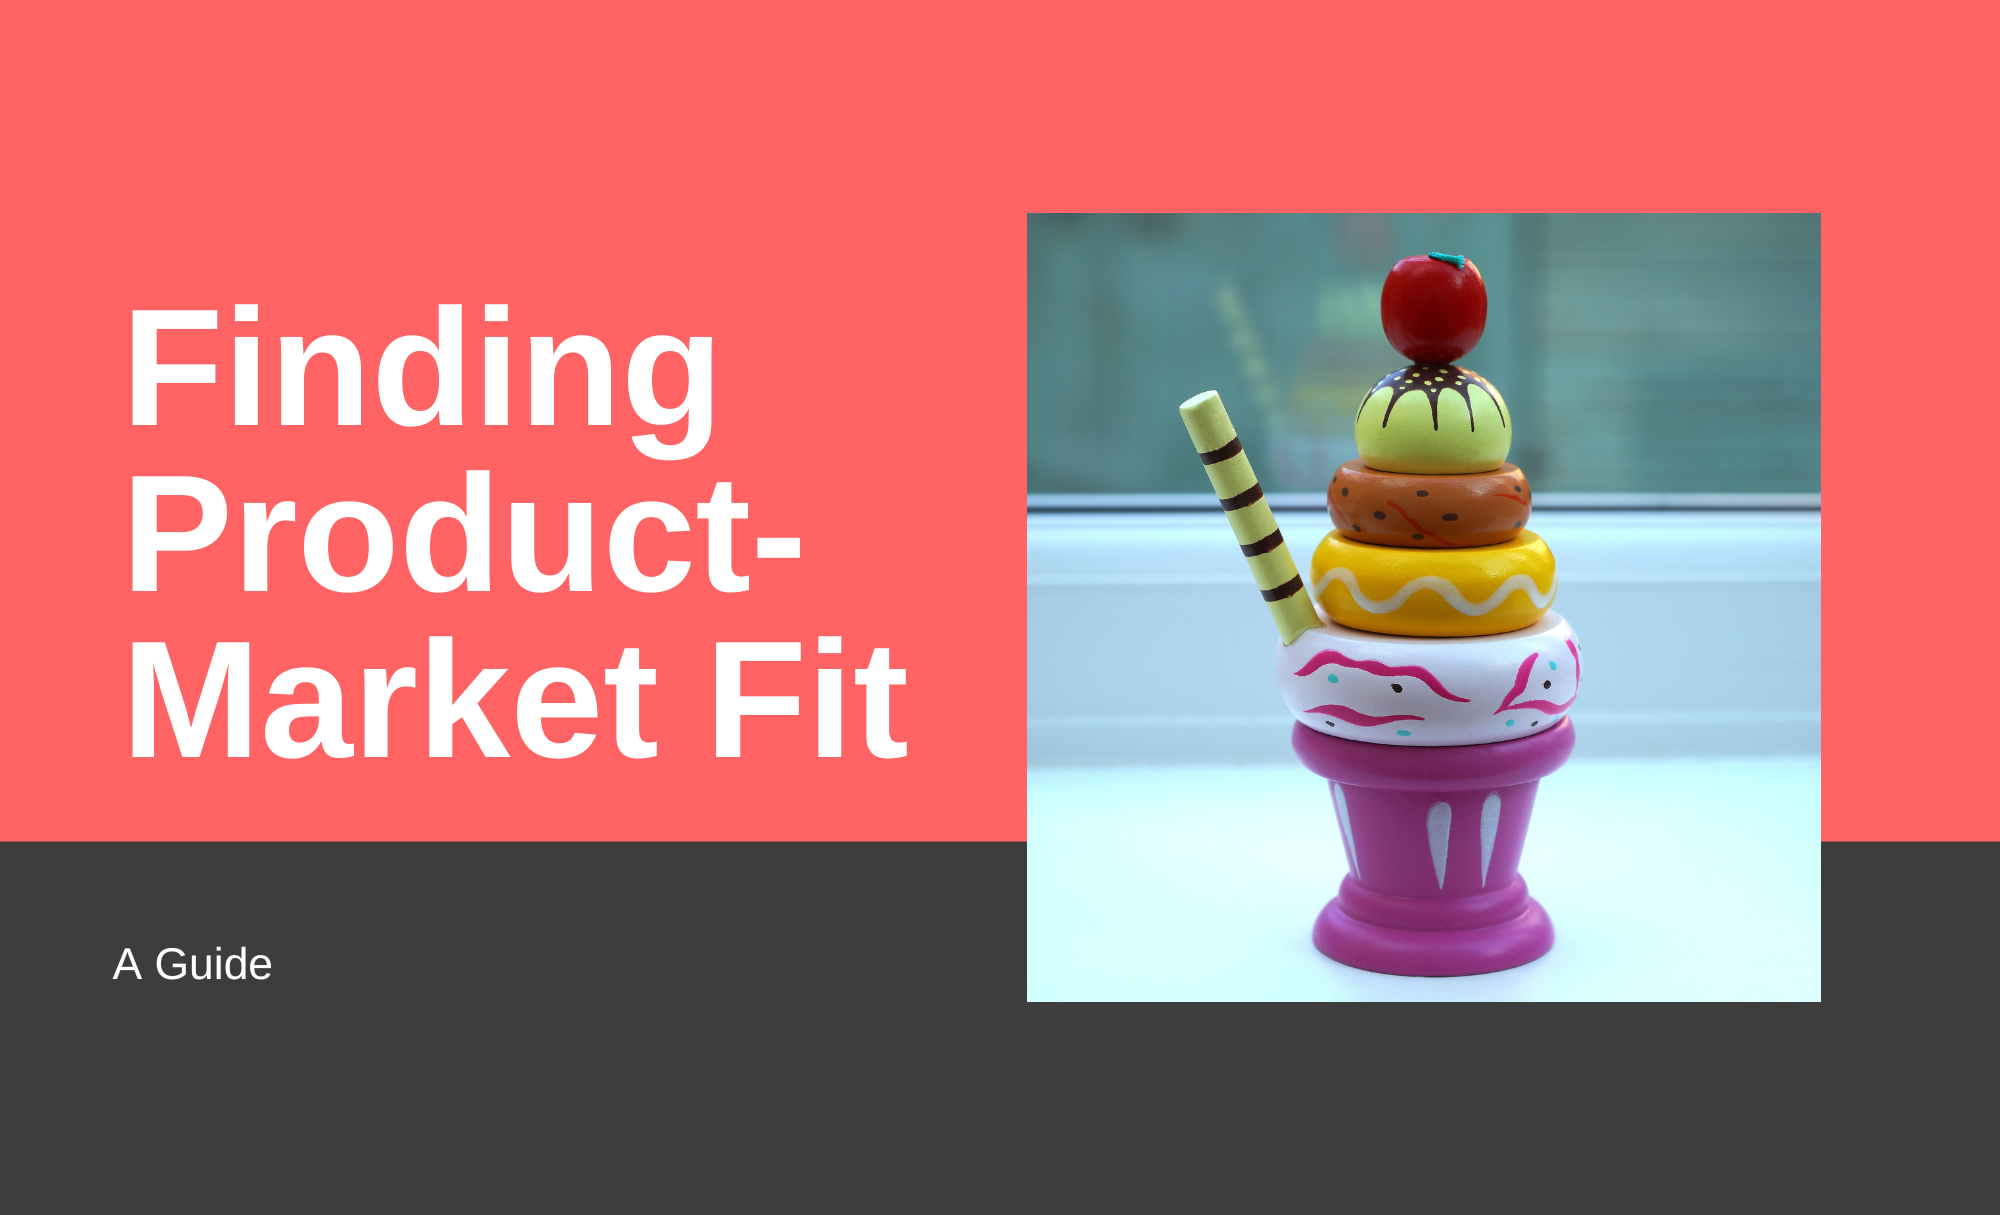 Finding Product-Market Fit